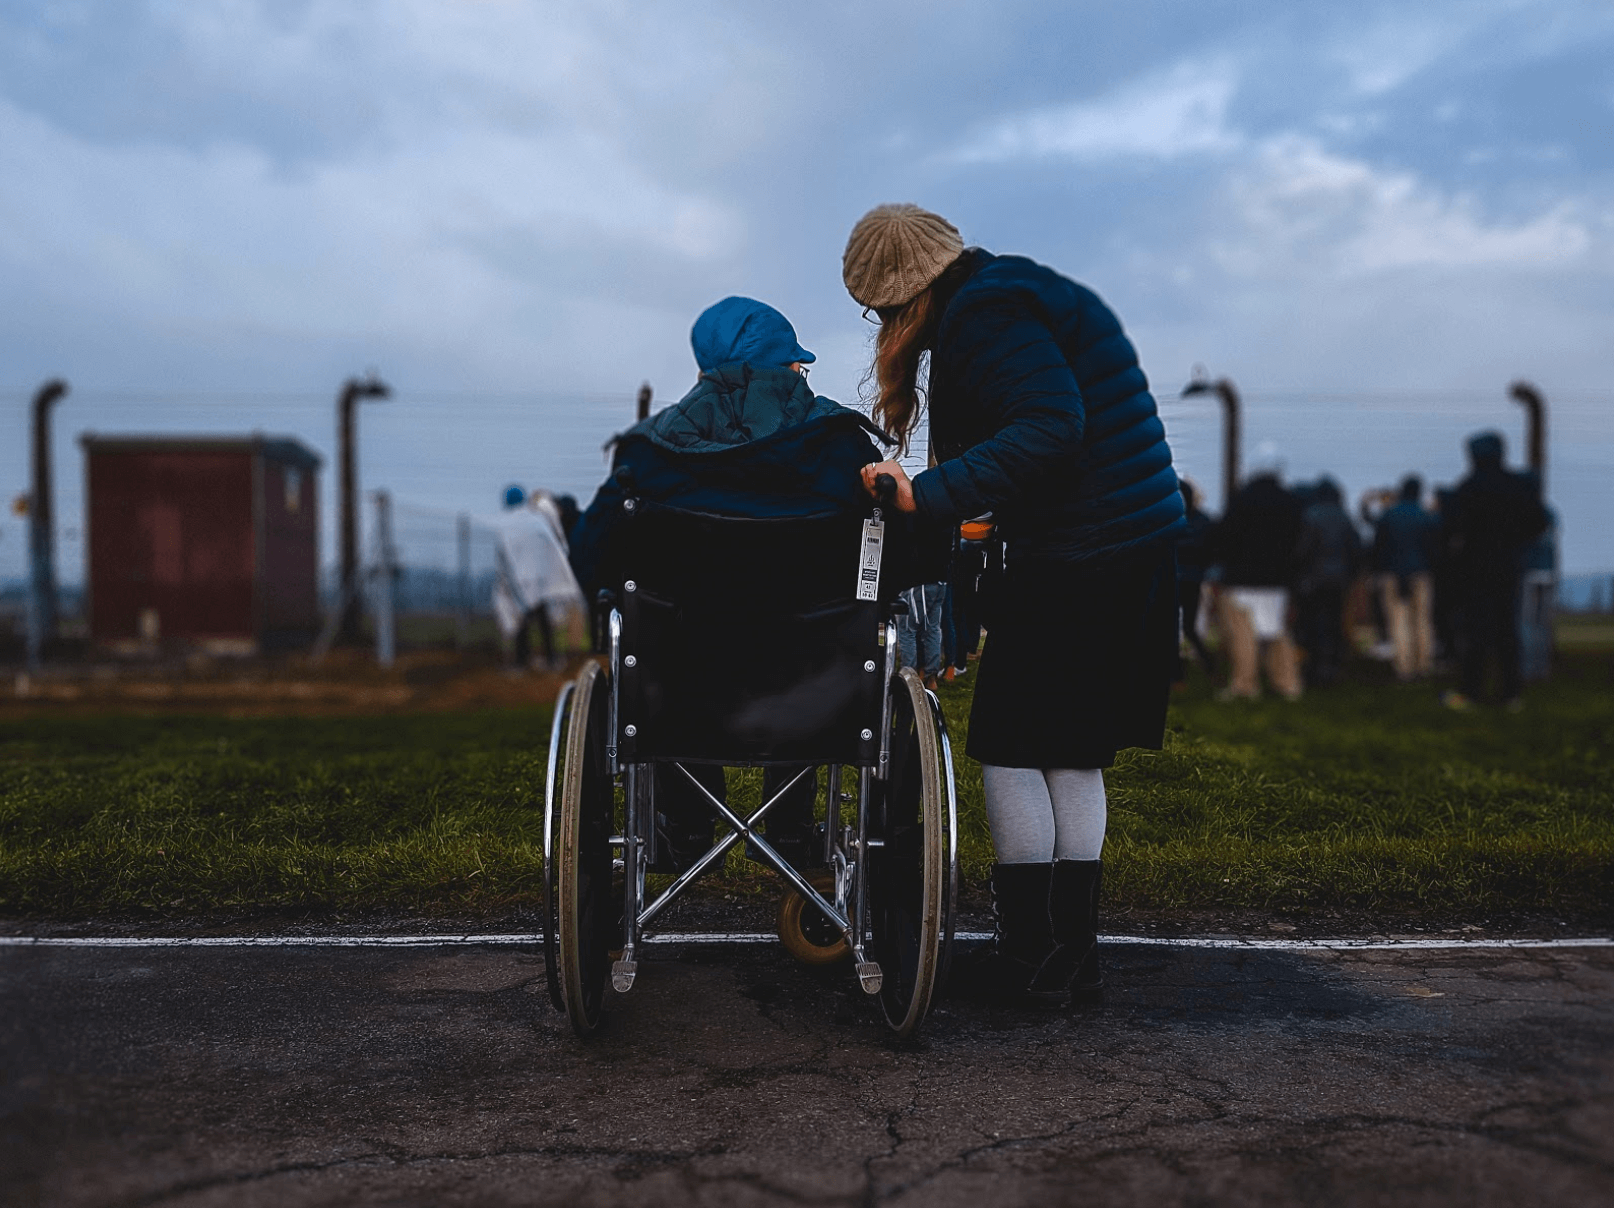 How Unhealthy Relationships Impact the Disabled Community